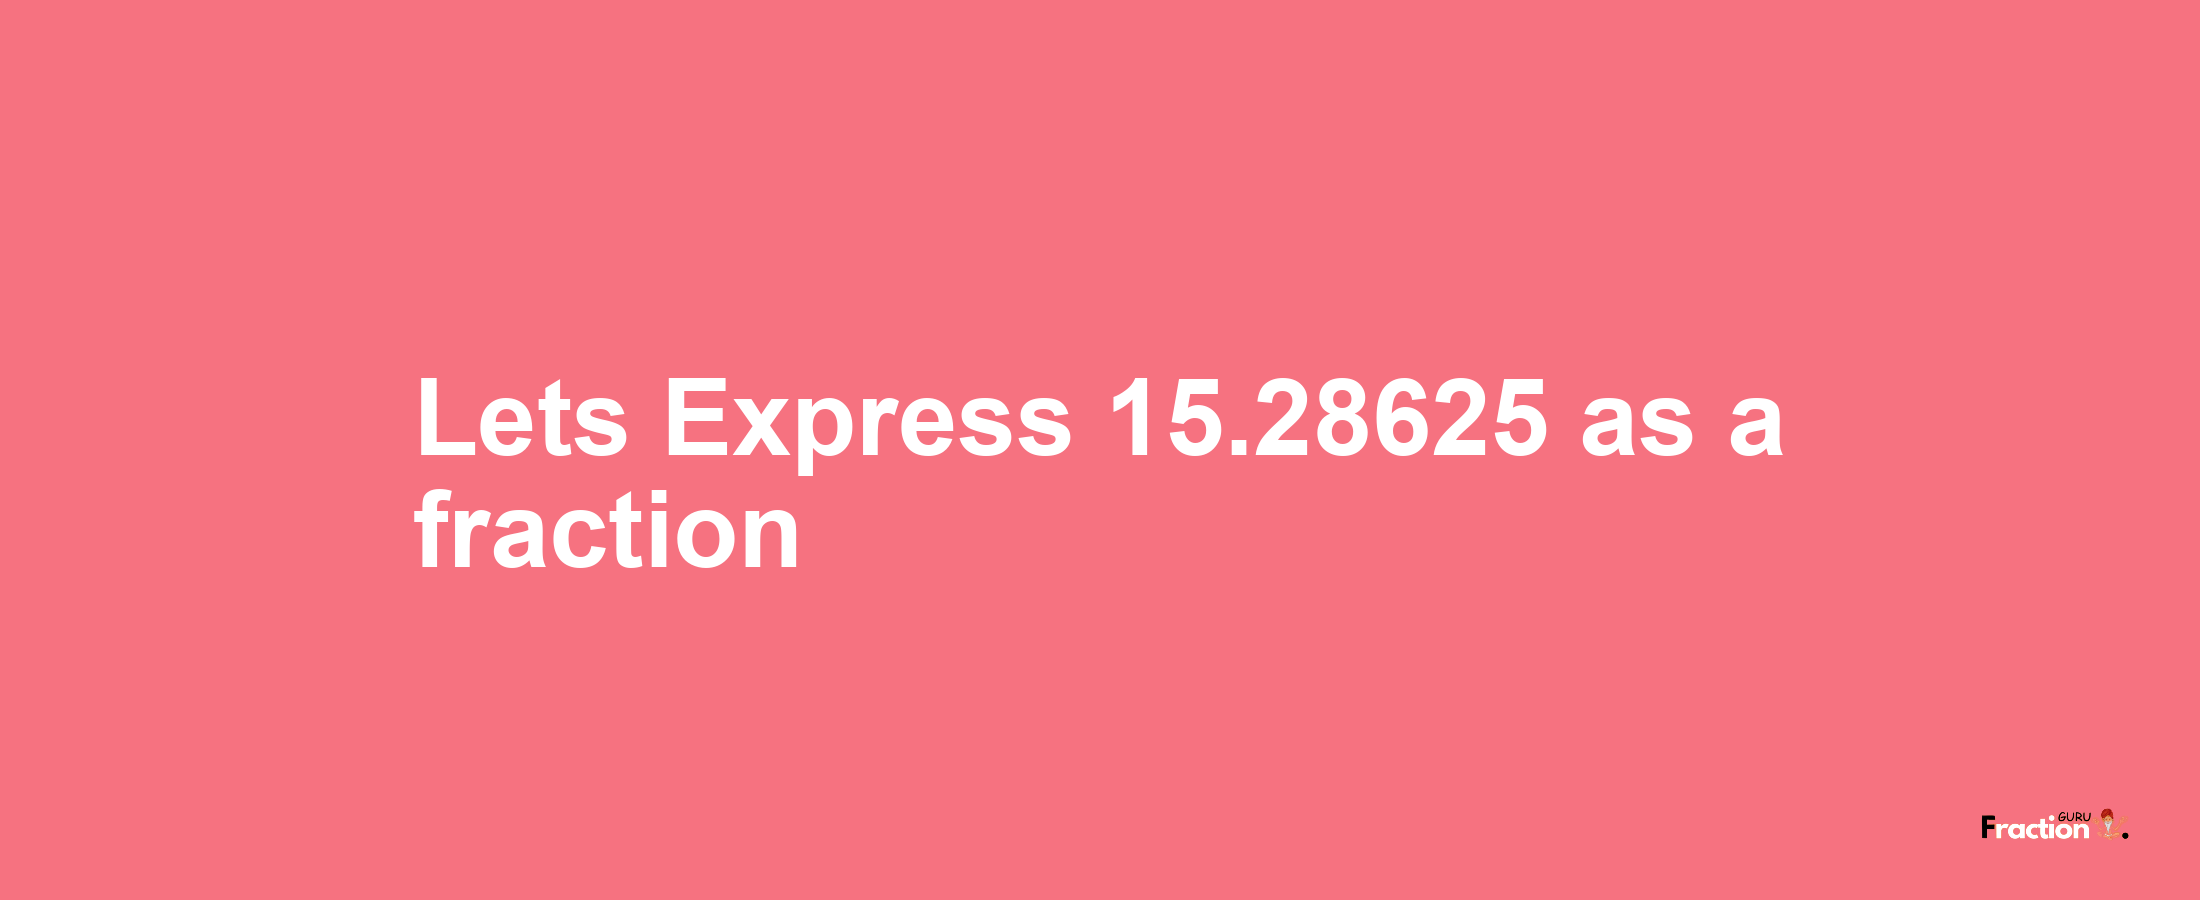 Lets Express 15.28625 as afraction